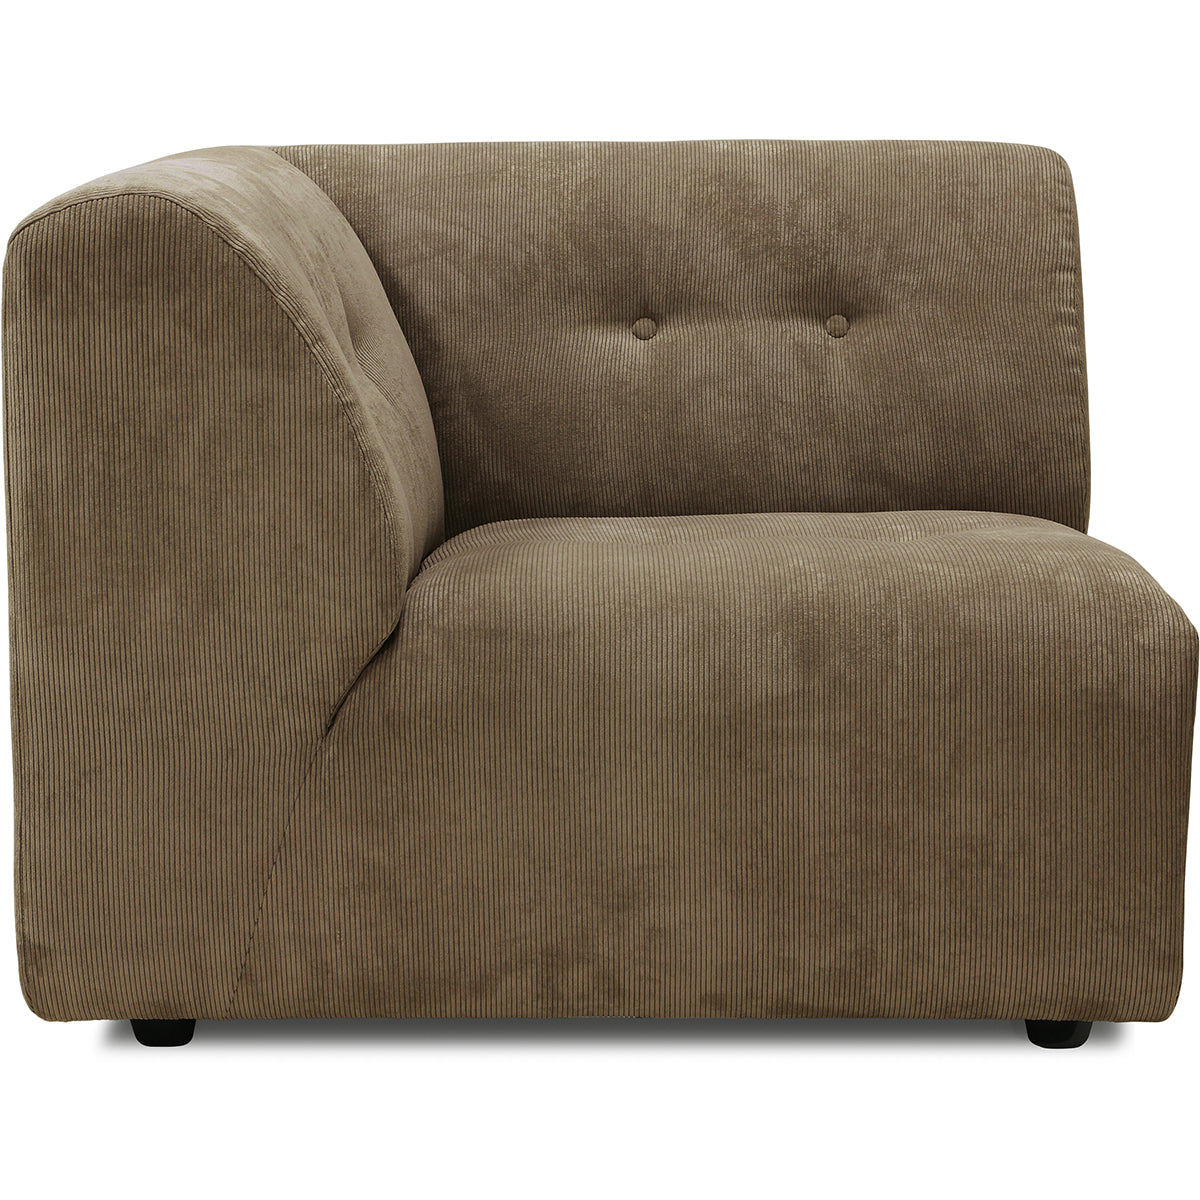 HKliving vint couch: element left, corduroy rib, brown